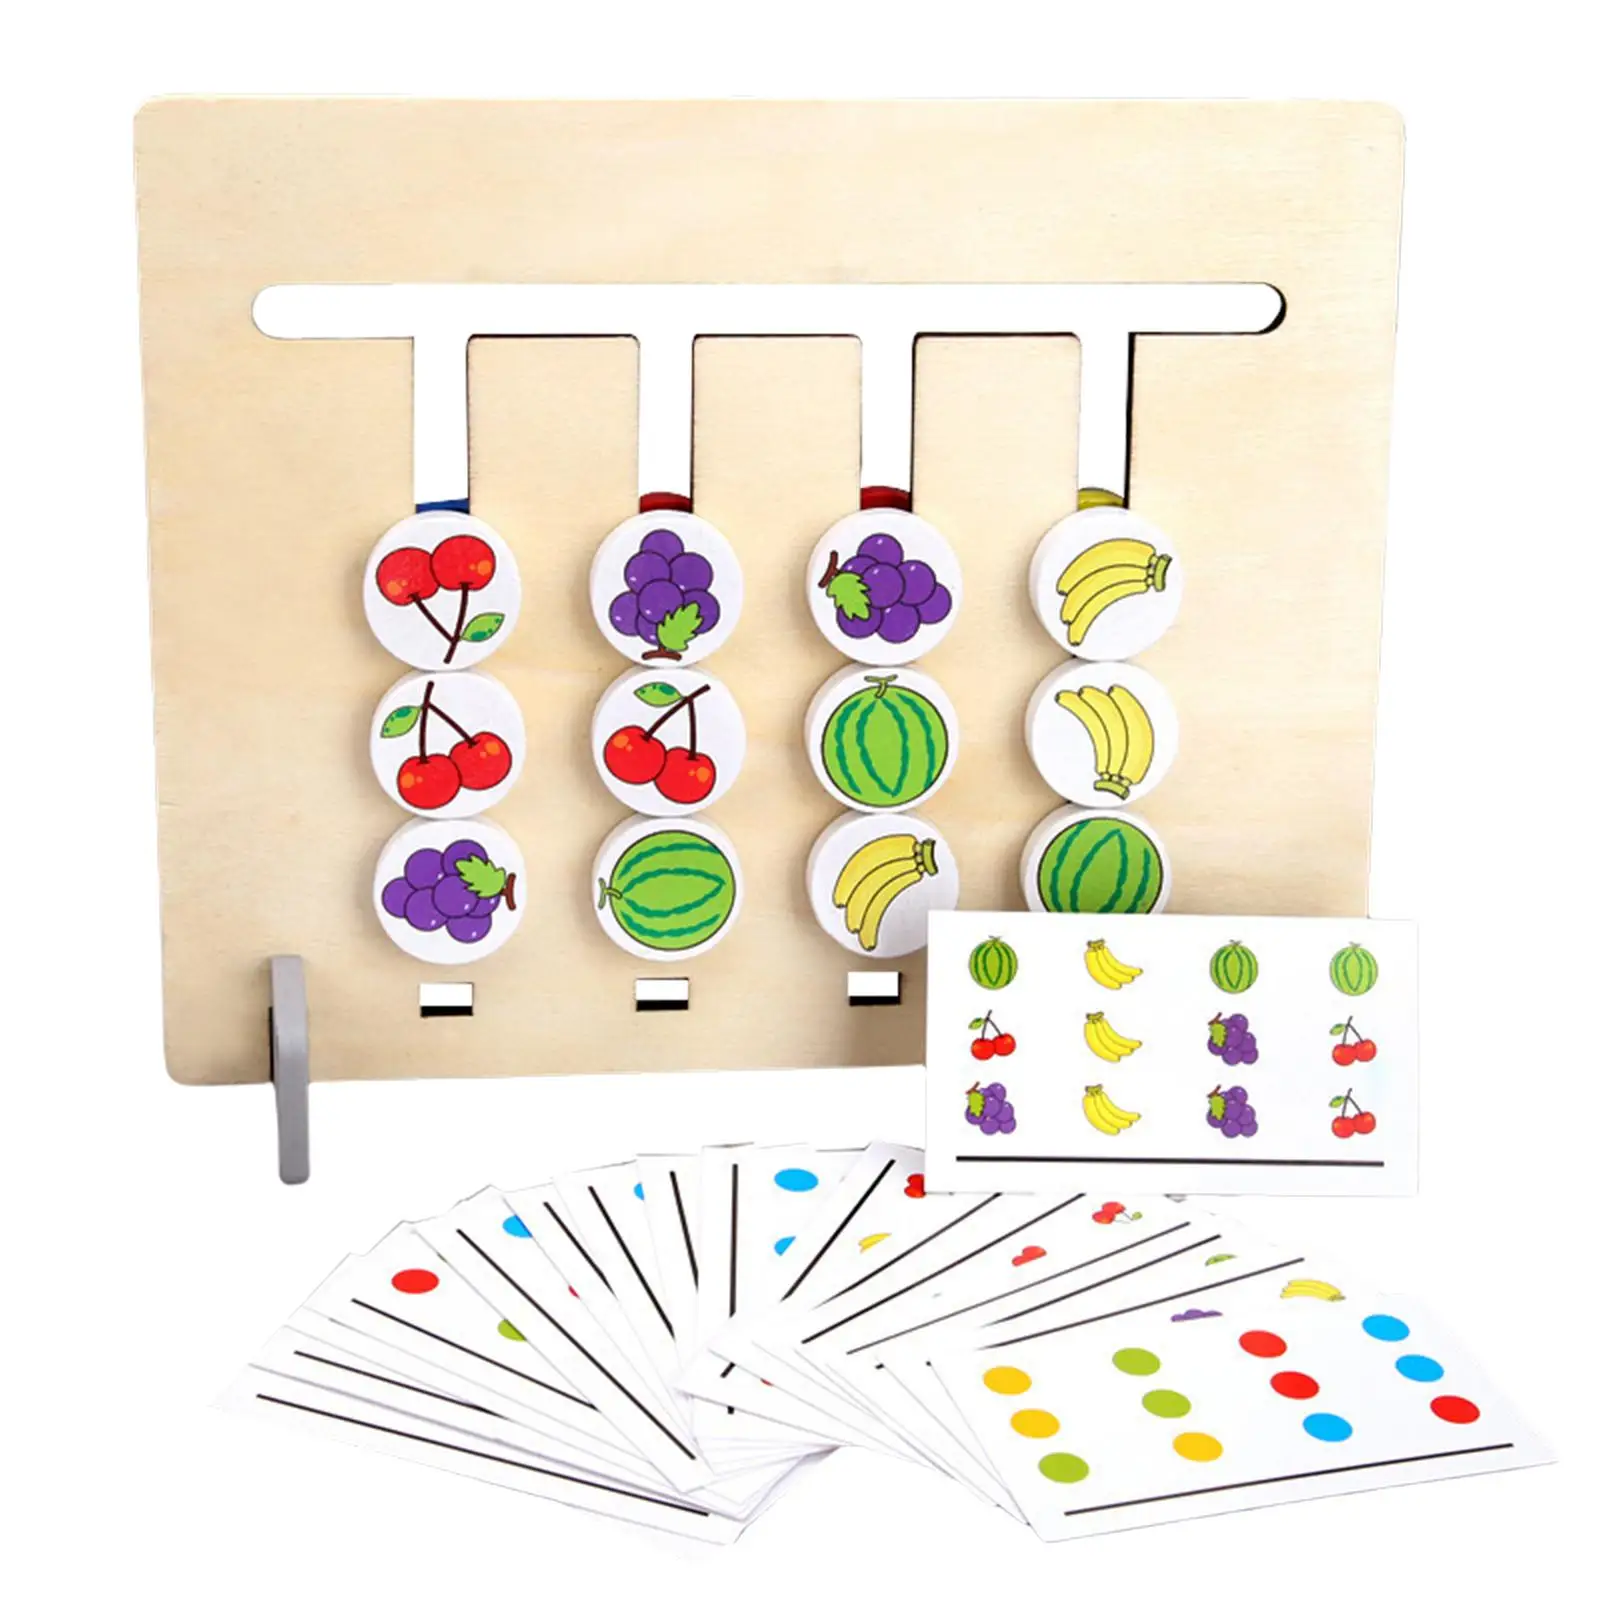 Slide Puzzle Toy Game Developing Educational Toy Wooden Board Game Shape Color Sorting Matching Game for Birthday Gifts